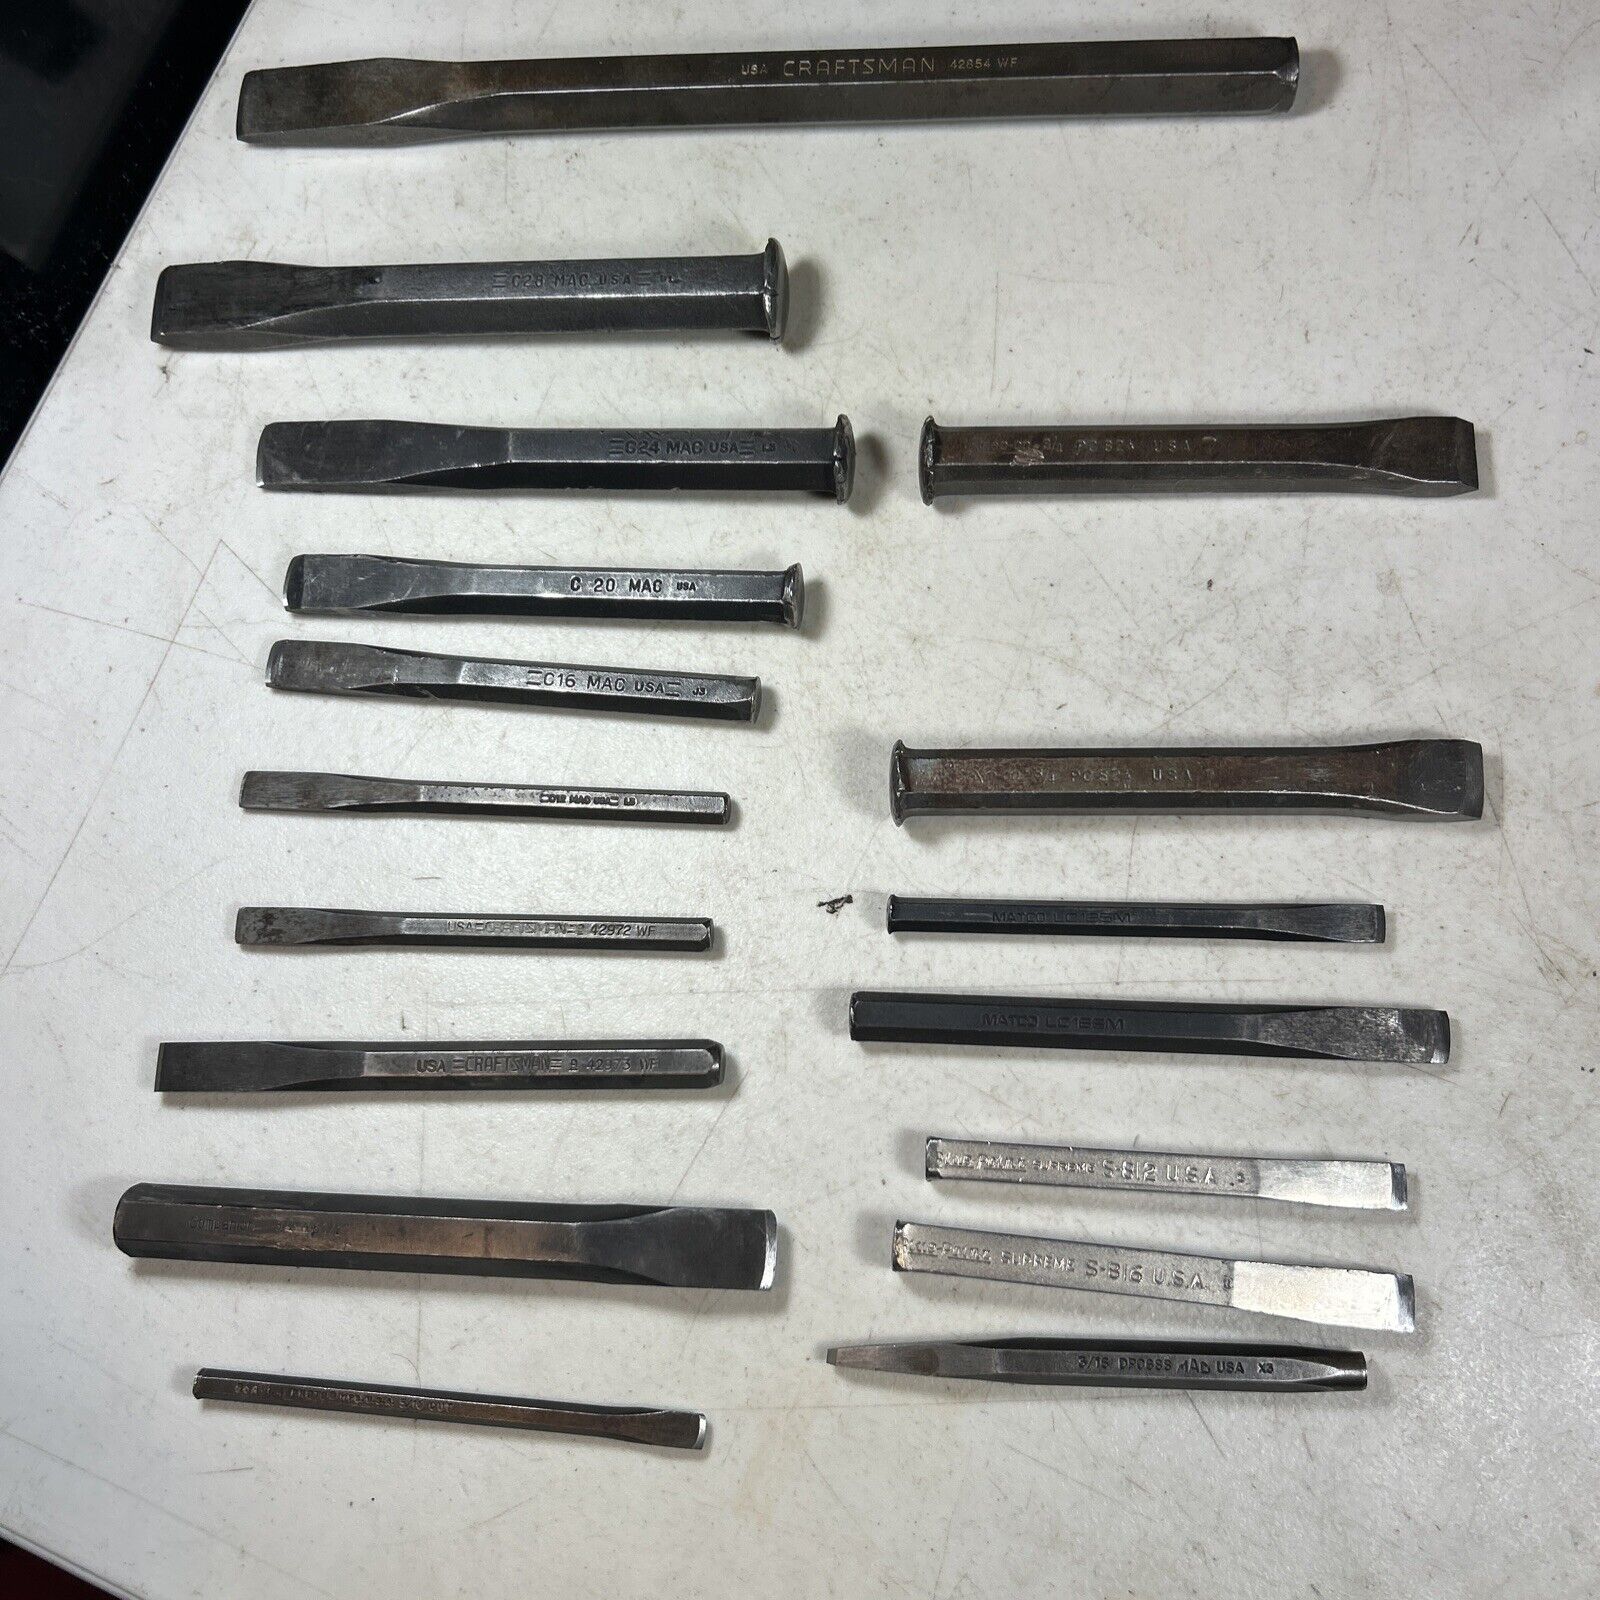 Big Lot Of L Chisels, Snap On, Mac, Matco, Craftsman & More Various Sizes